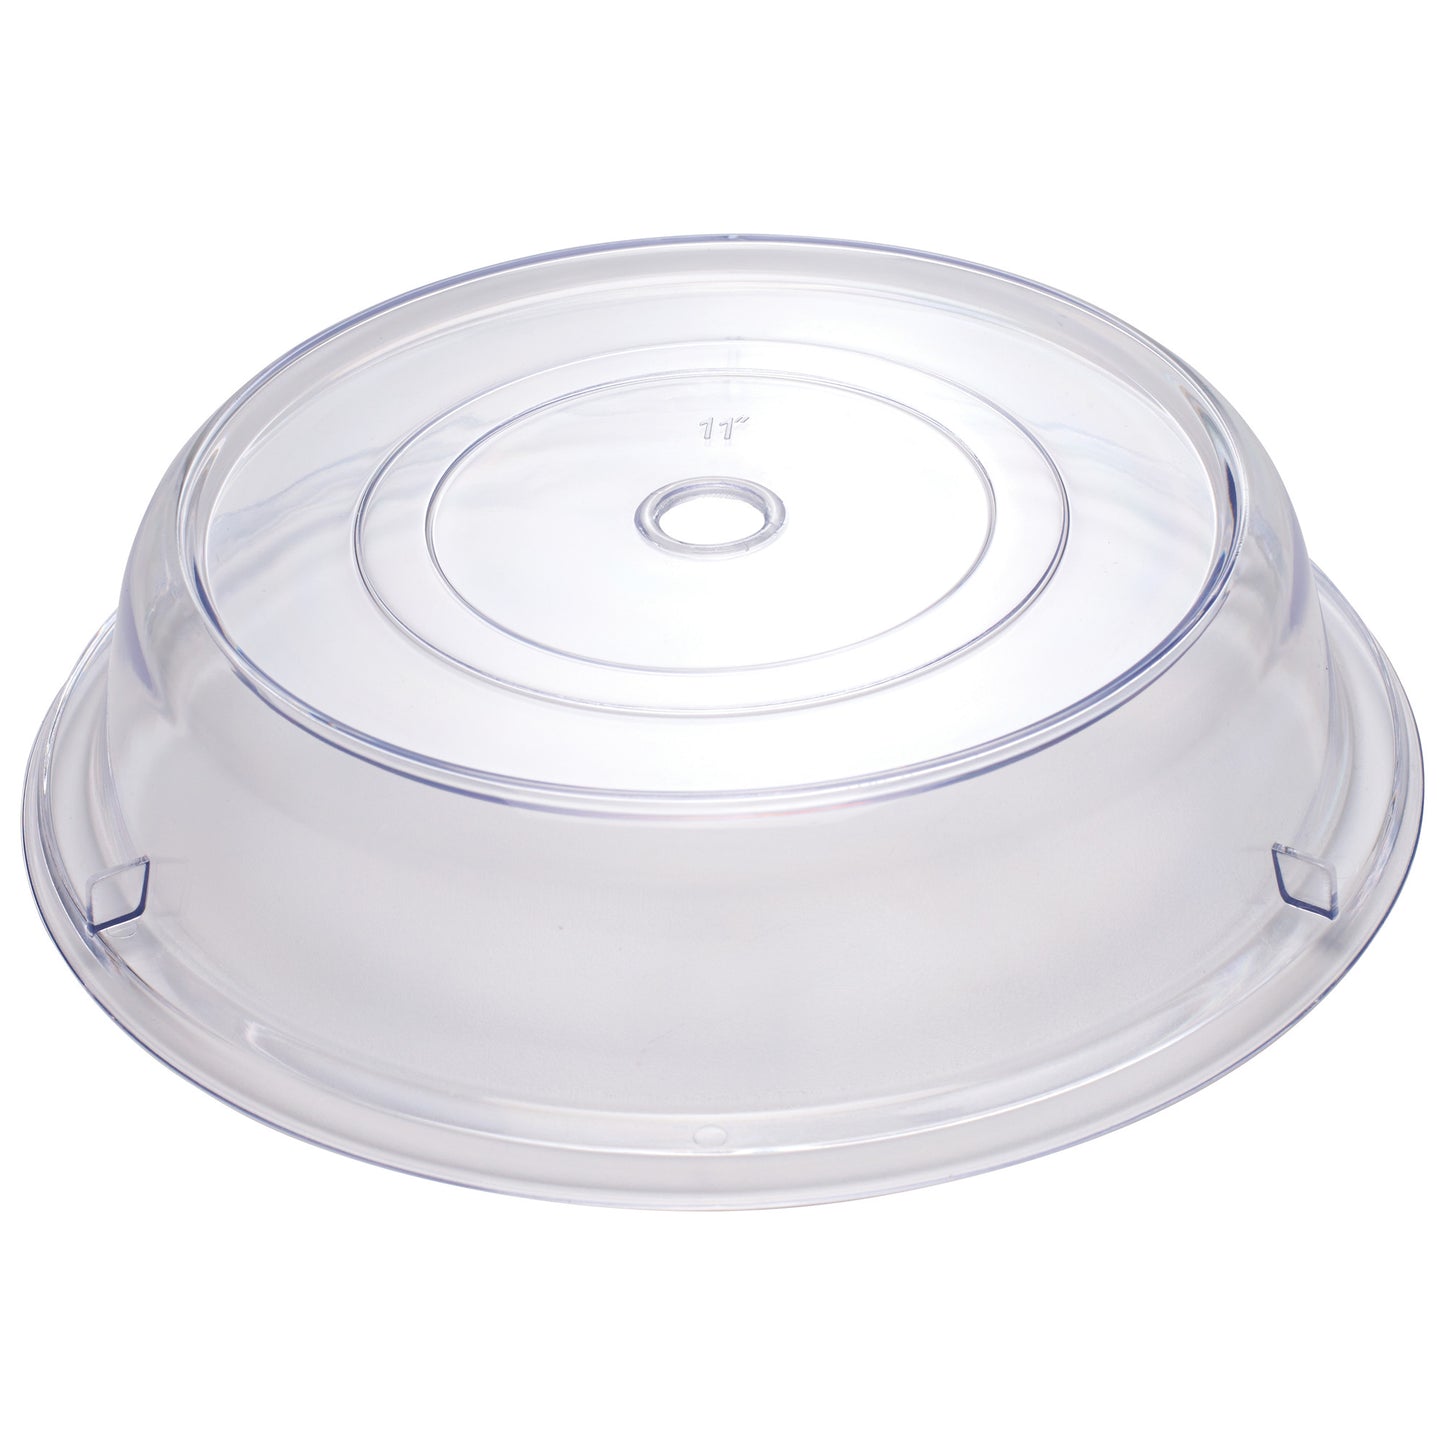 PPCR-11 - Clear Polycarbonate Plate Cover - 11" Dia